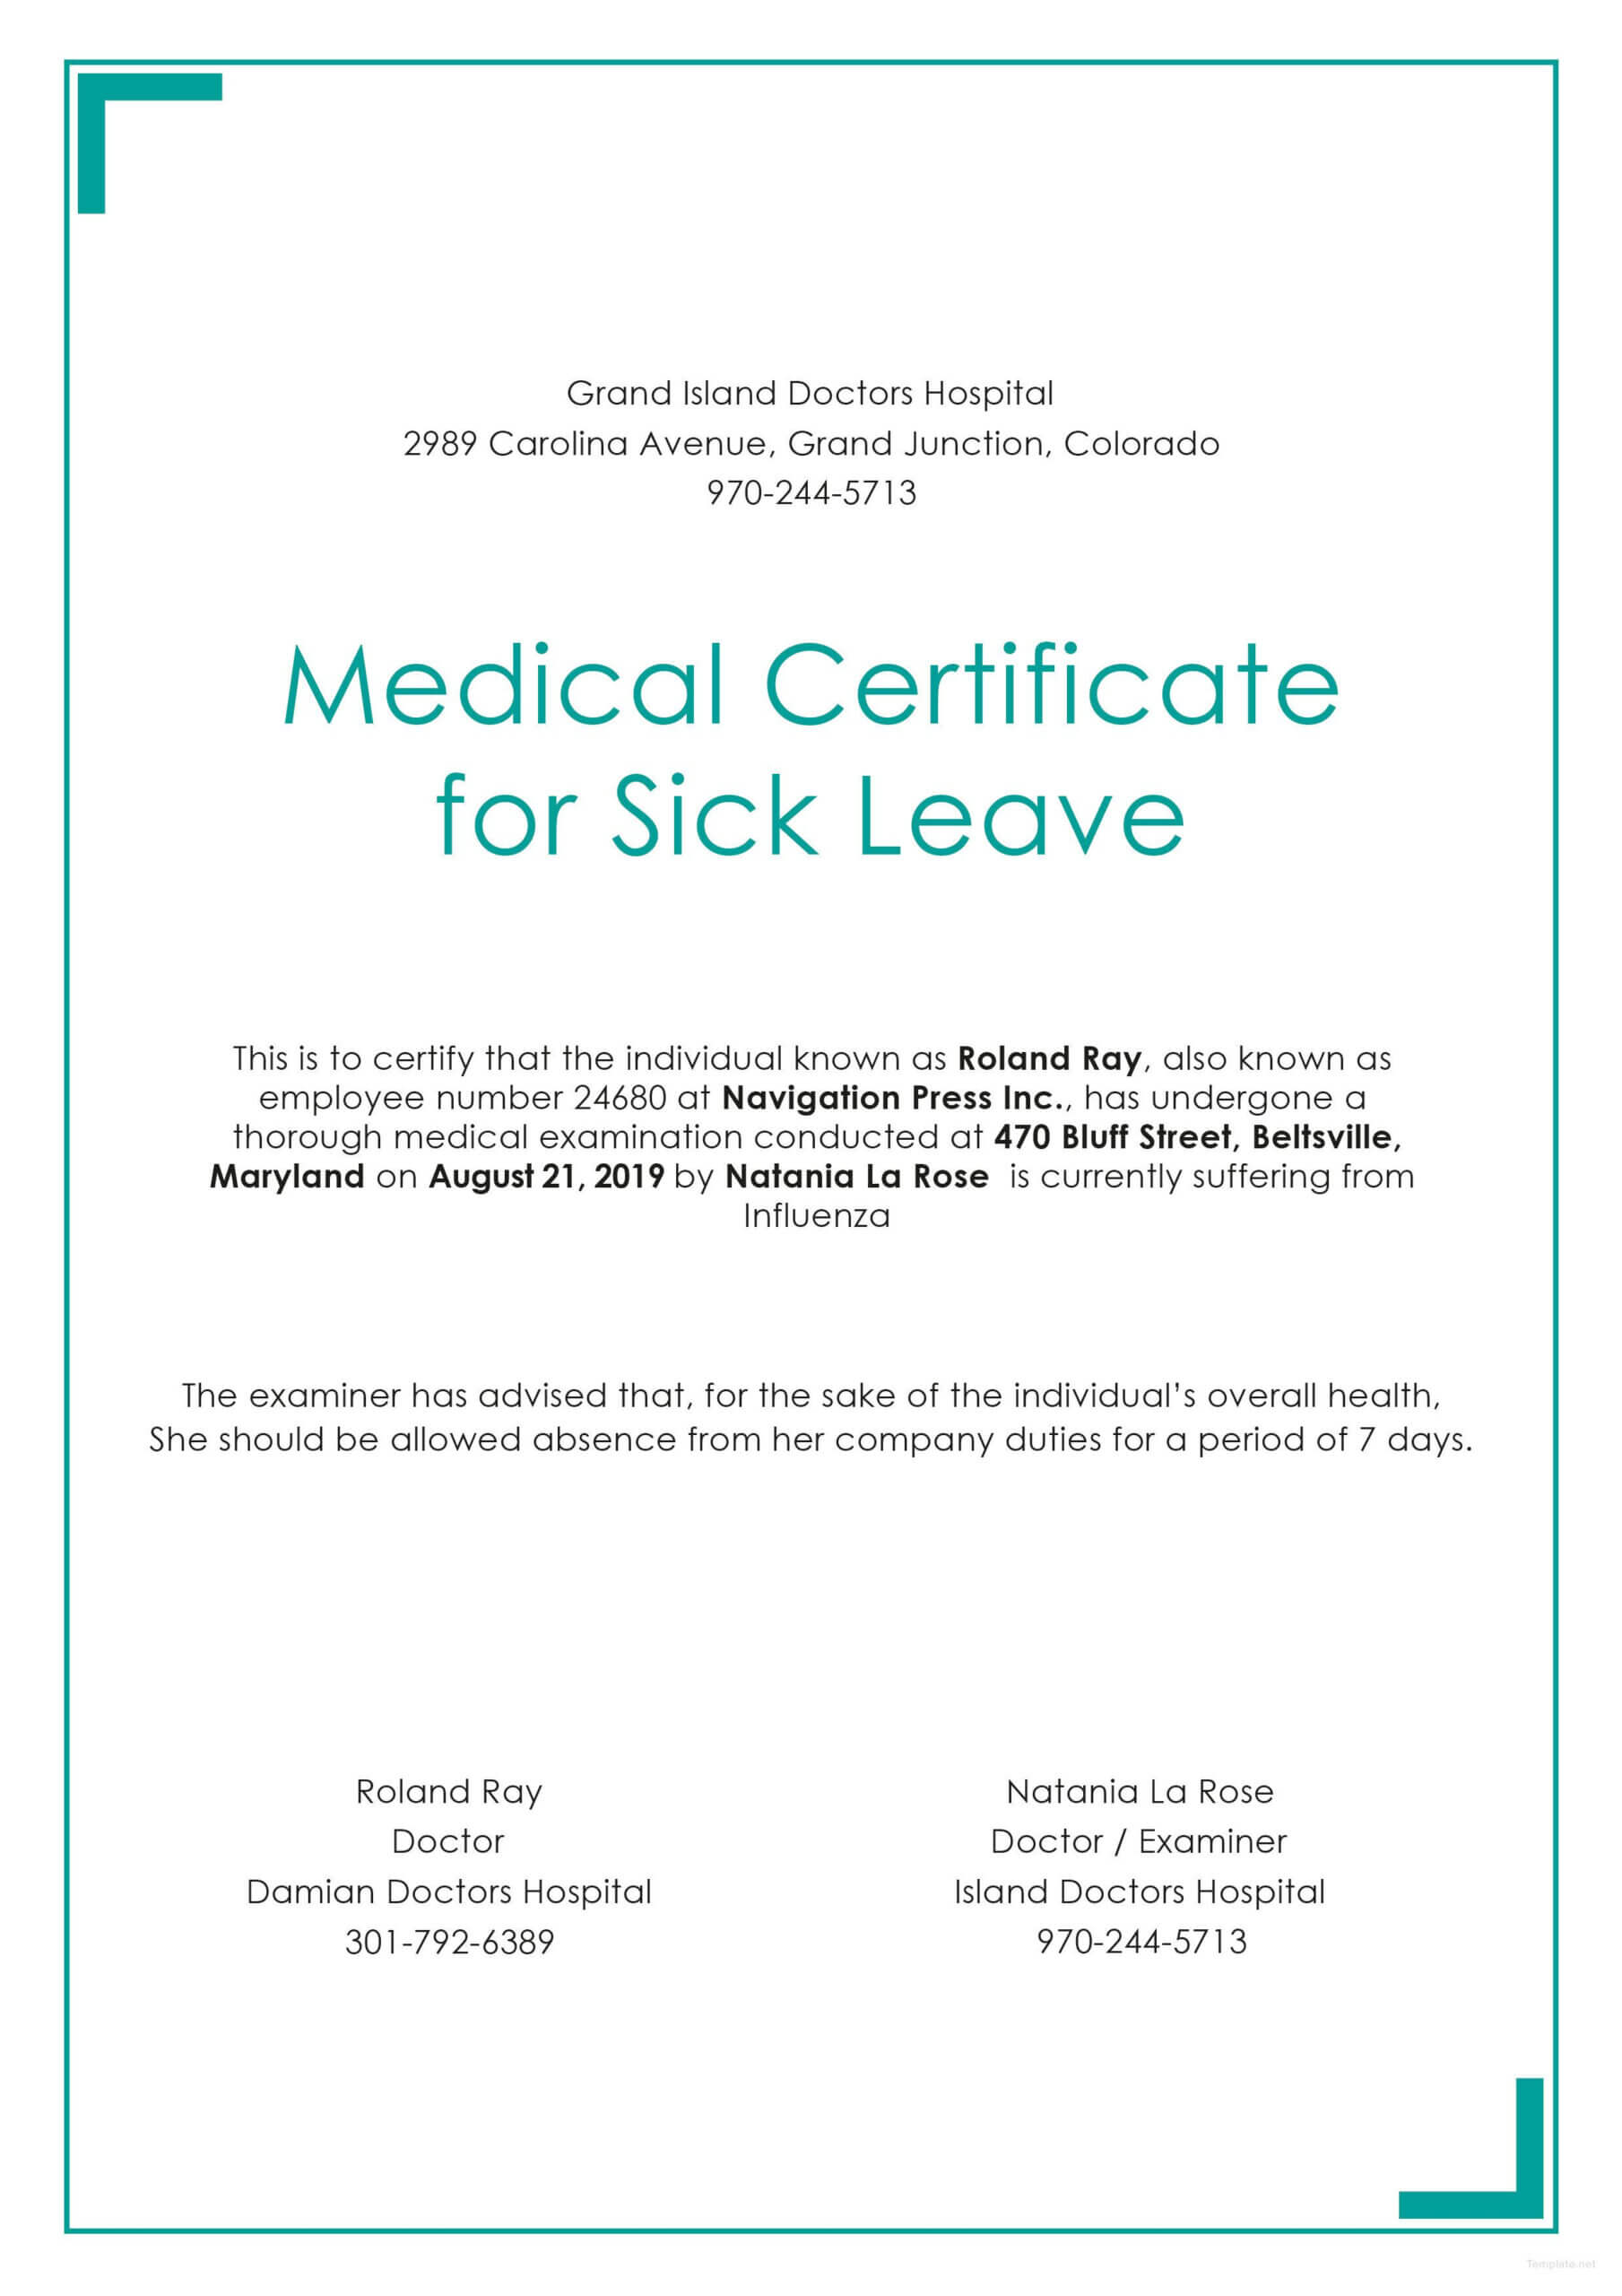 Free Medical Certificate For Sick Leave | Medical Within Certificate Of Inspection Template